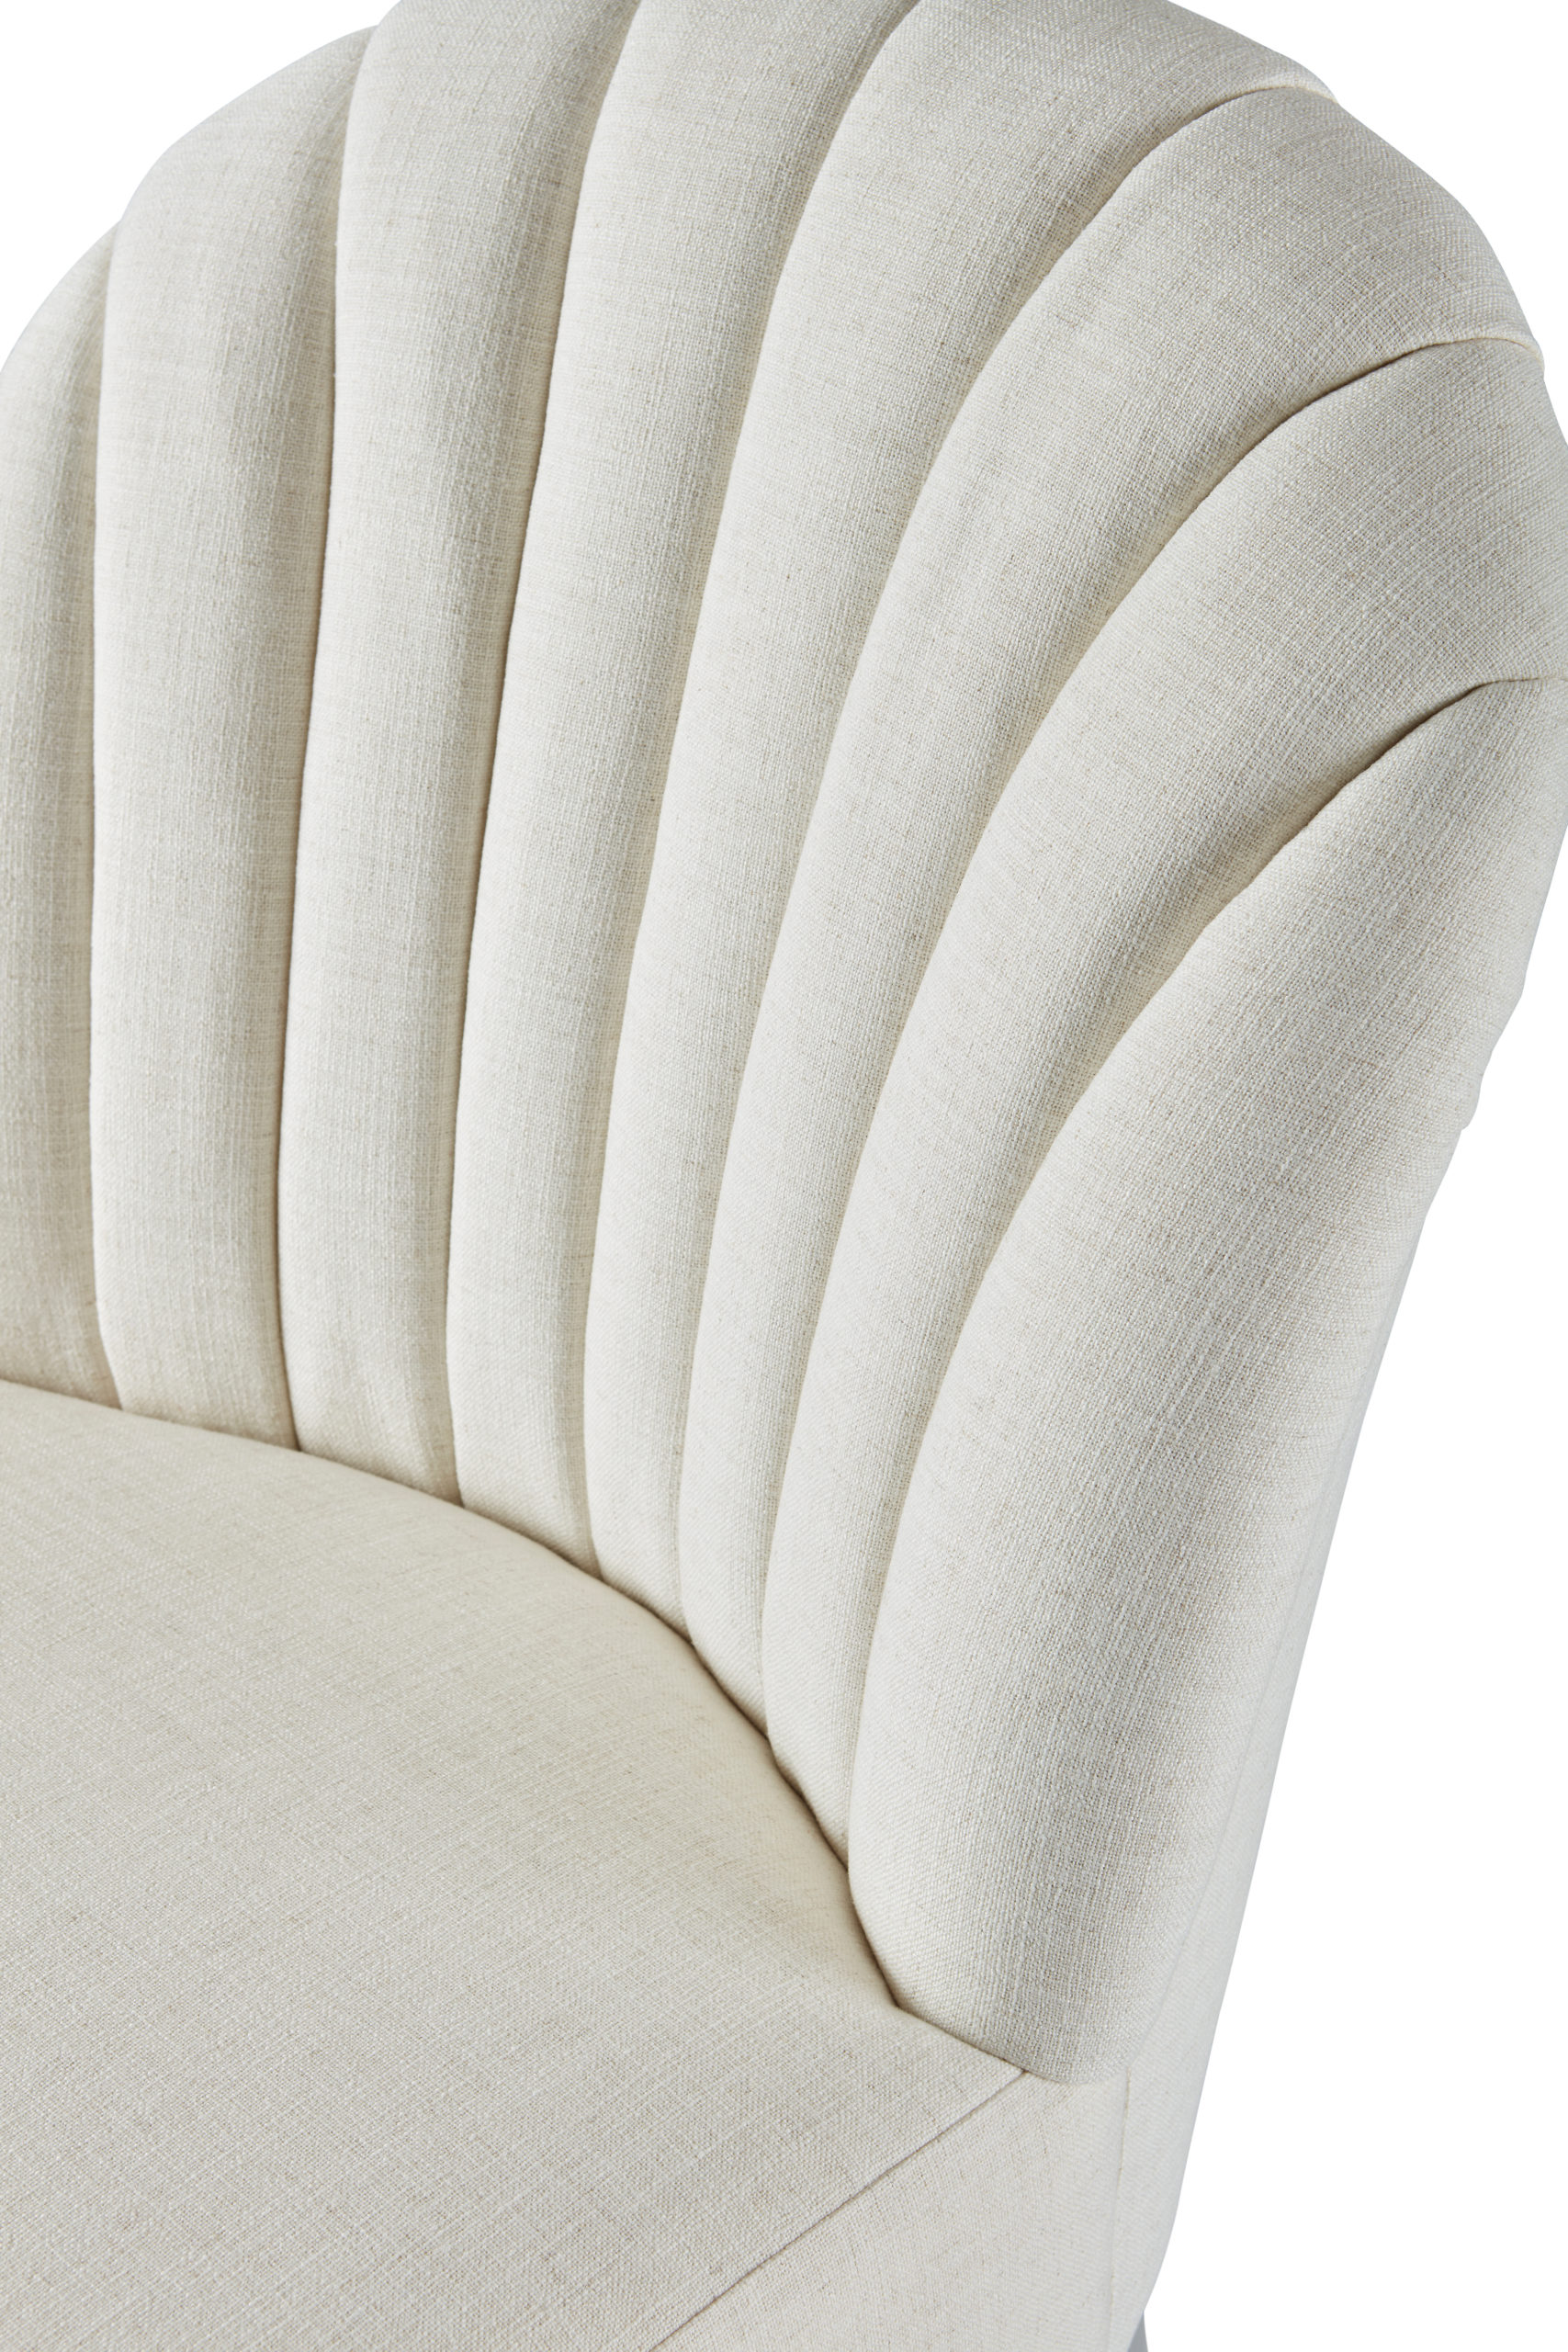 Baker_products_WNWN_lola_chair_BAU3310c_DETAIL-scaled-1